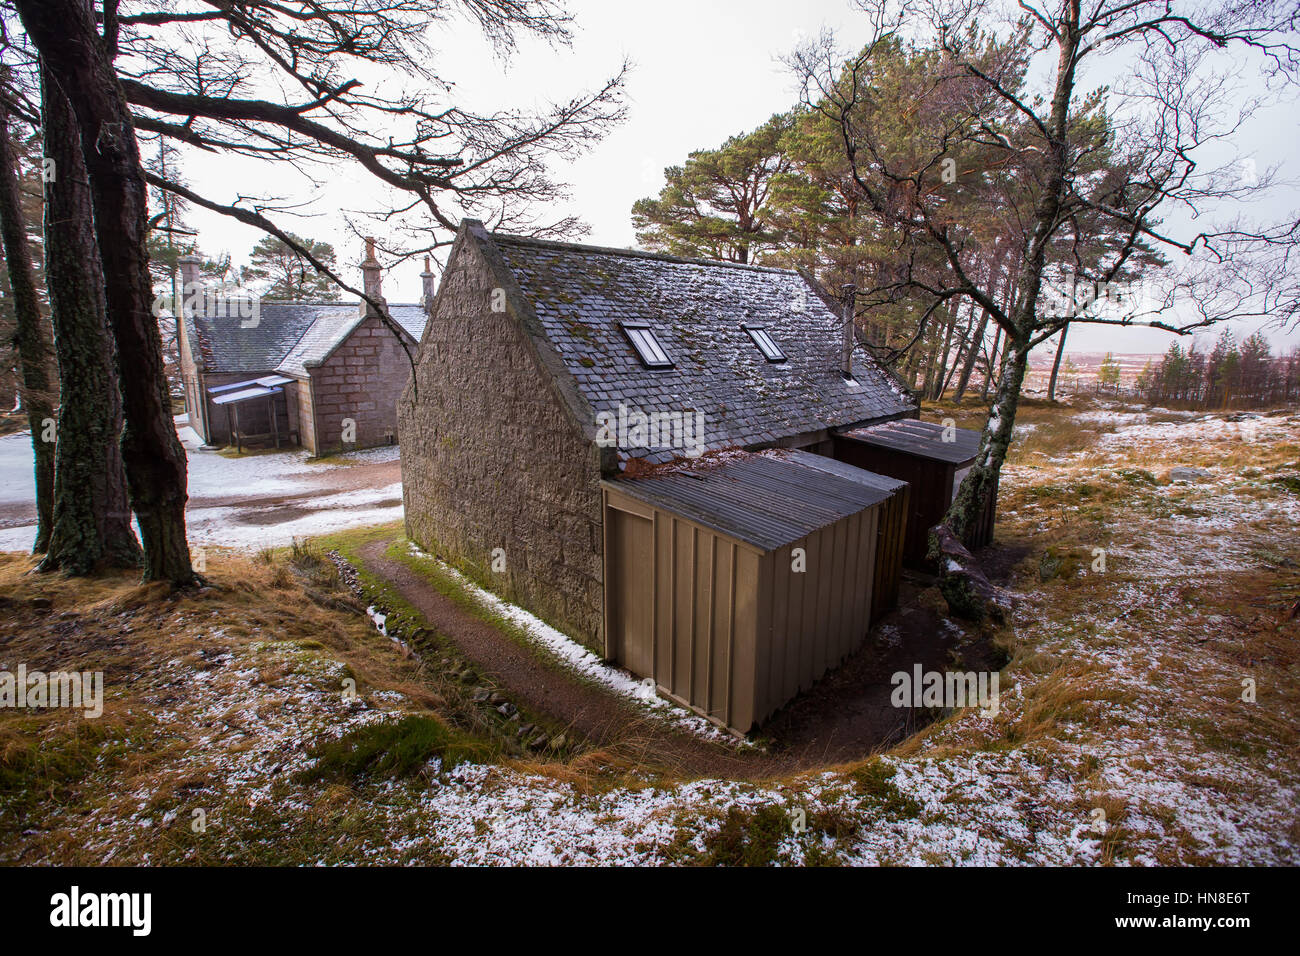 Gelder Shiel mountain bothy on the Balmoral Estate near Ballater, Aberdeenshire, Scotland, UK, used by walkers for shelter in bad weather. Stock Photo